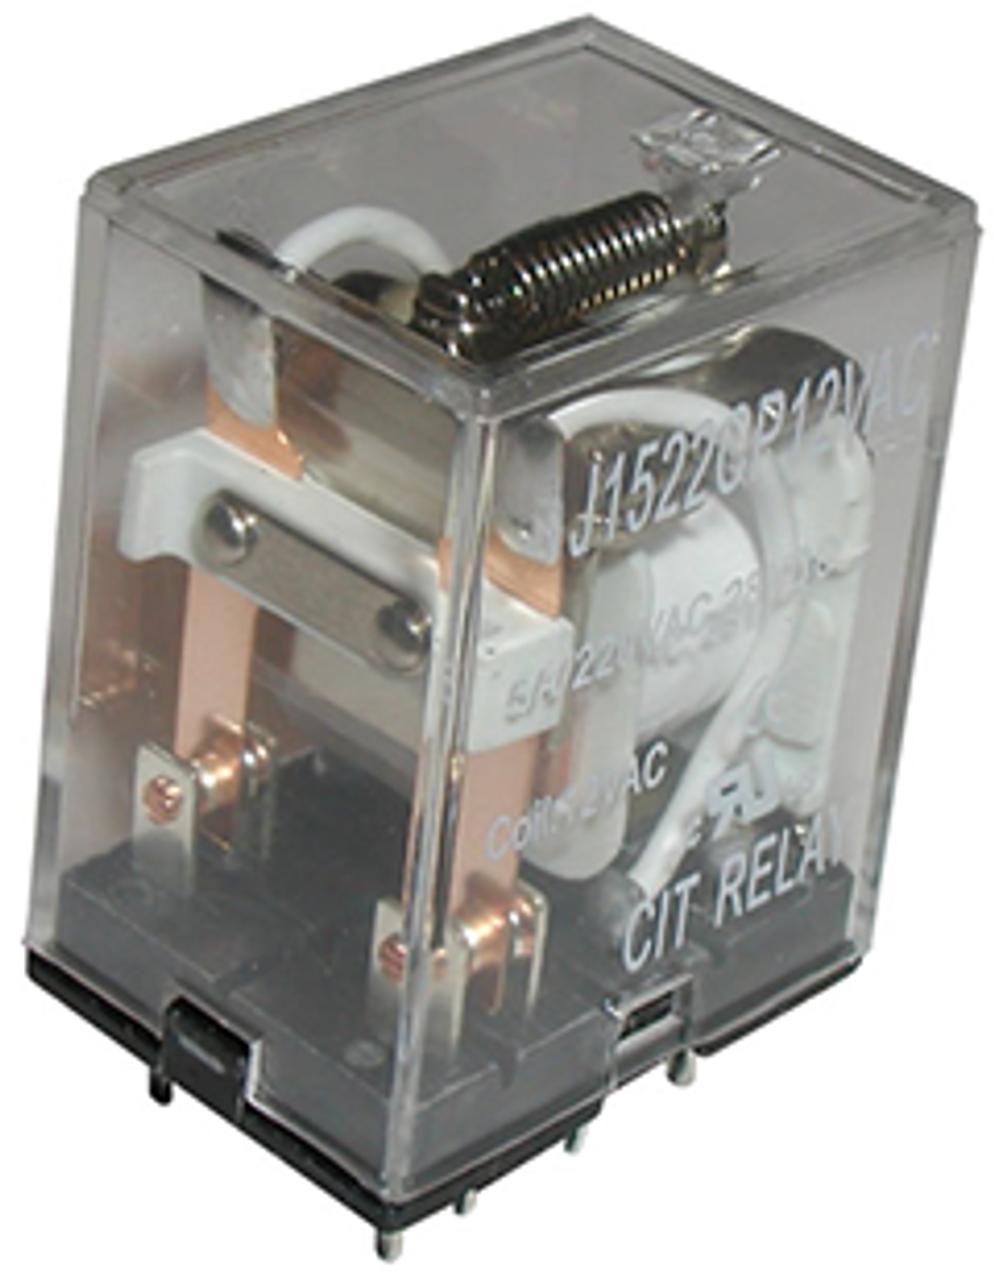 CIT Relay and Switch J1524CT12VACT Industrial Relays